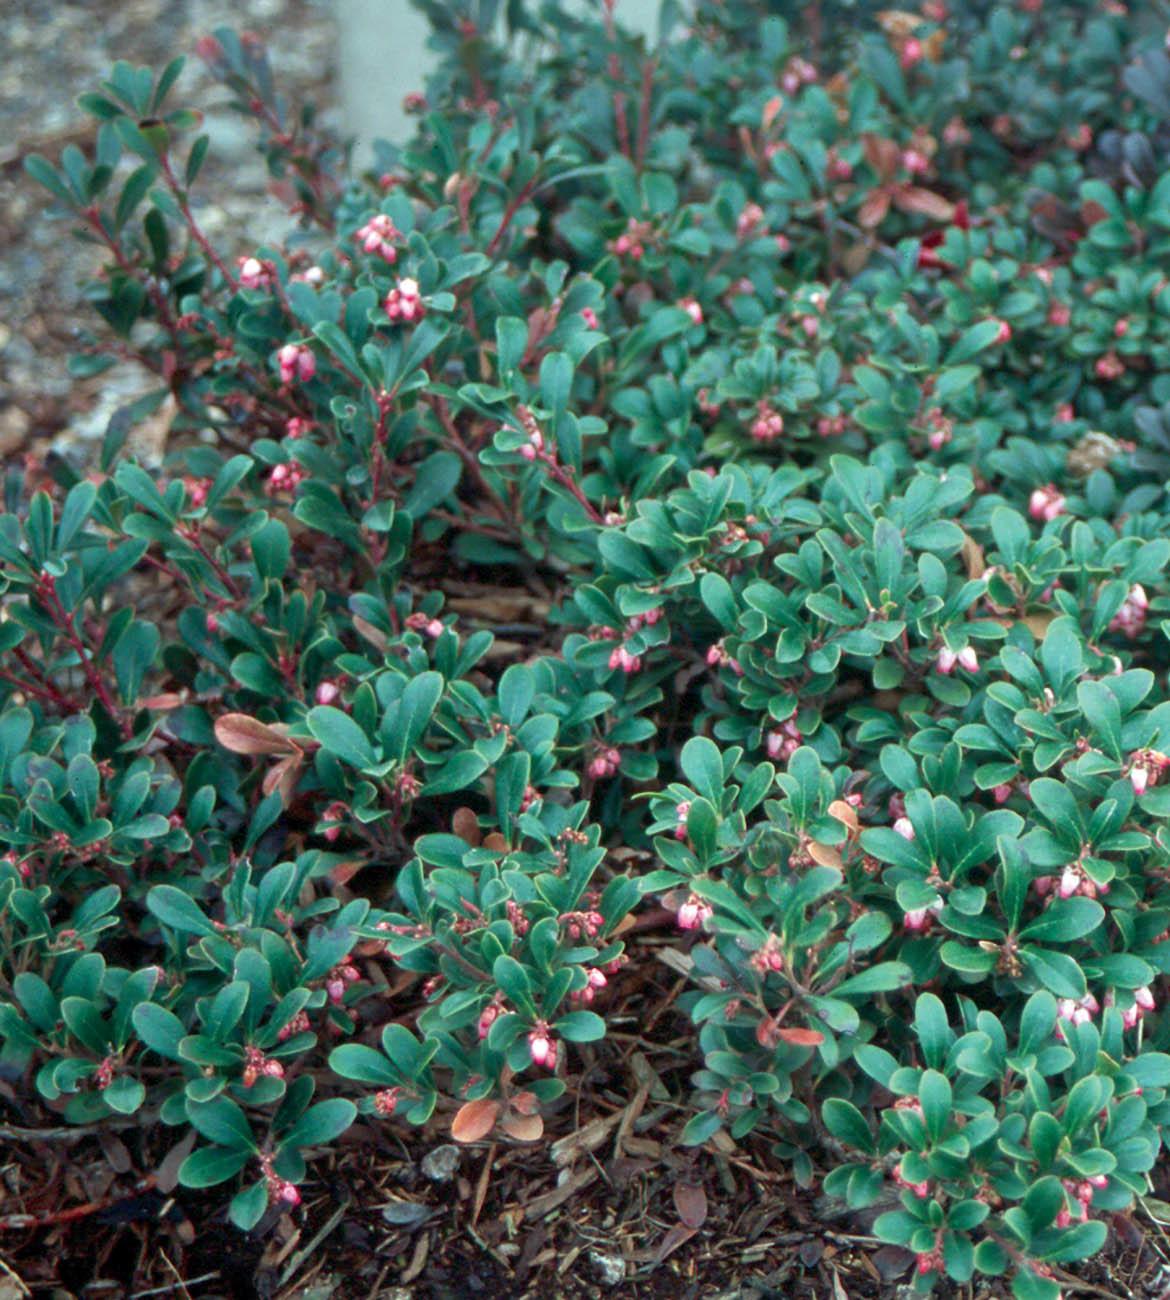 dense green tangle of dark leaves and tiny pink cup-shaped flowers